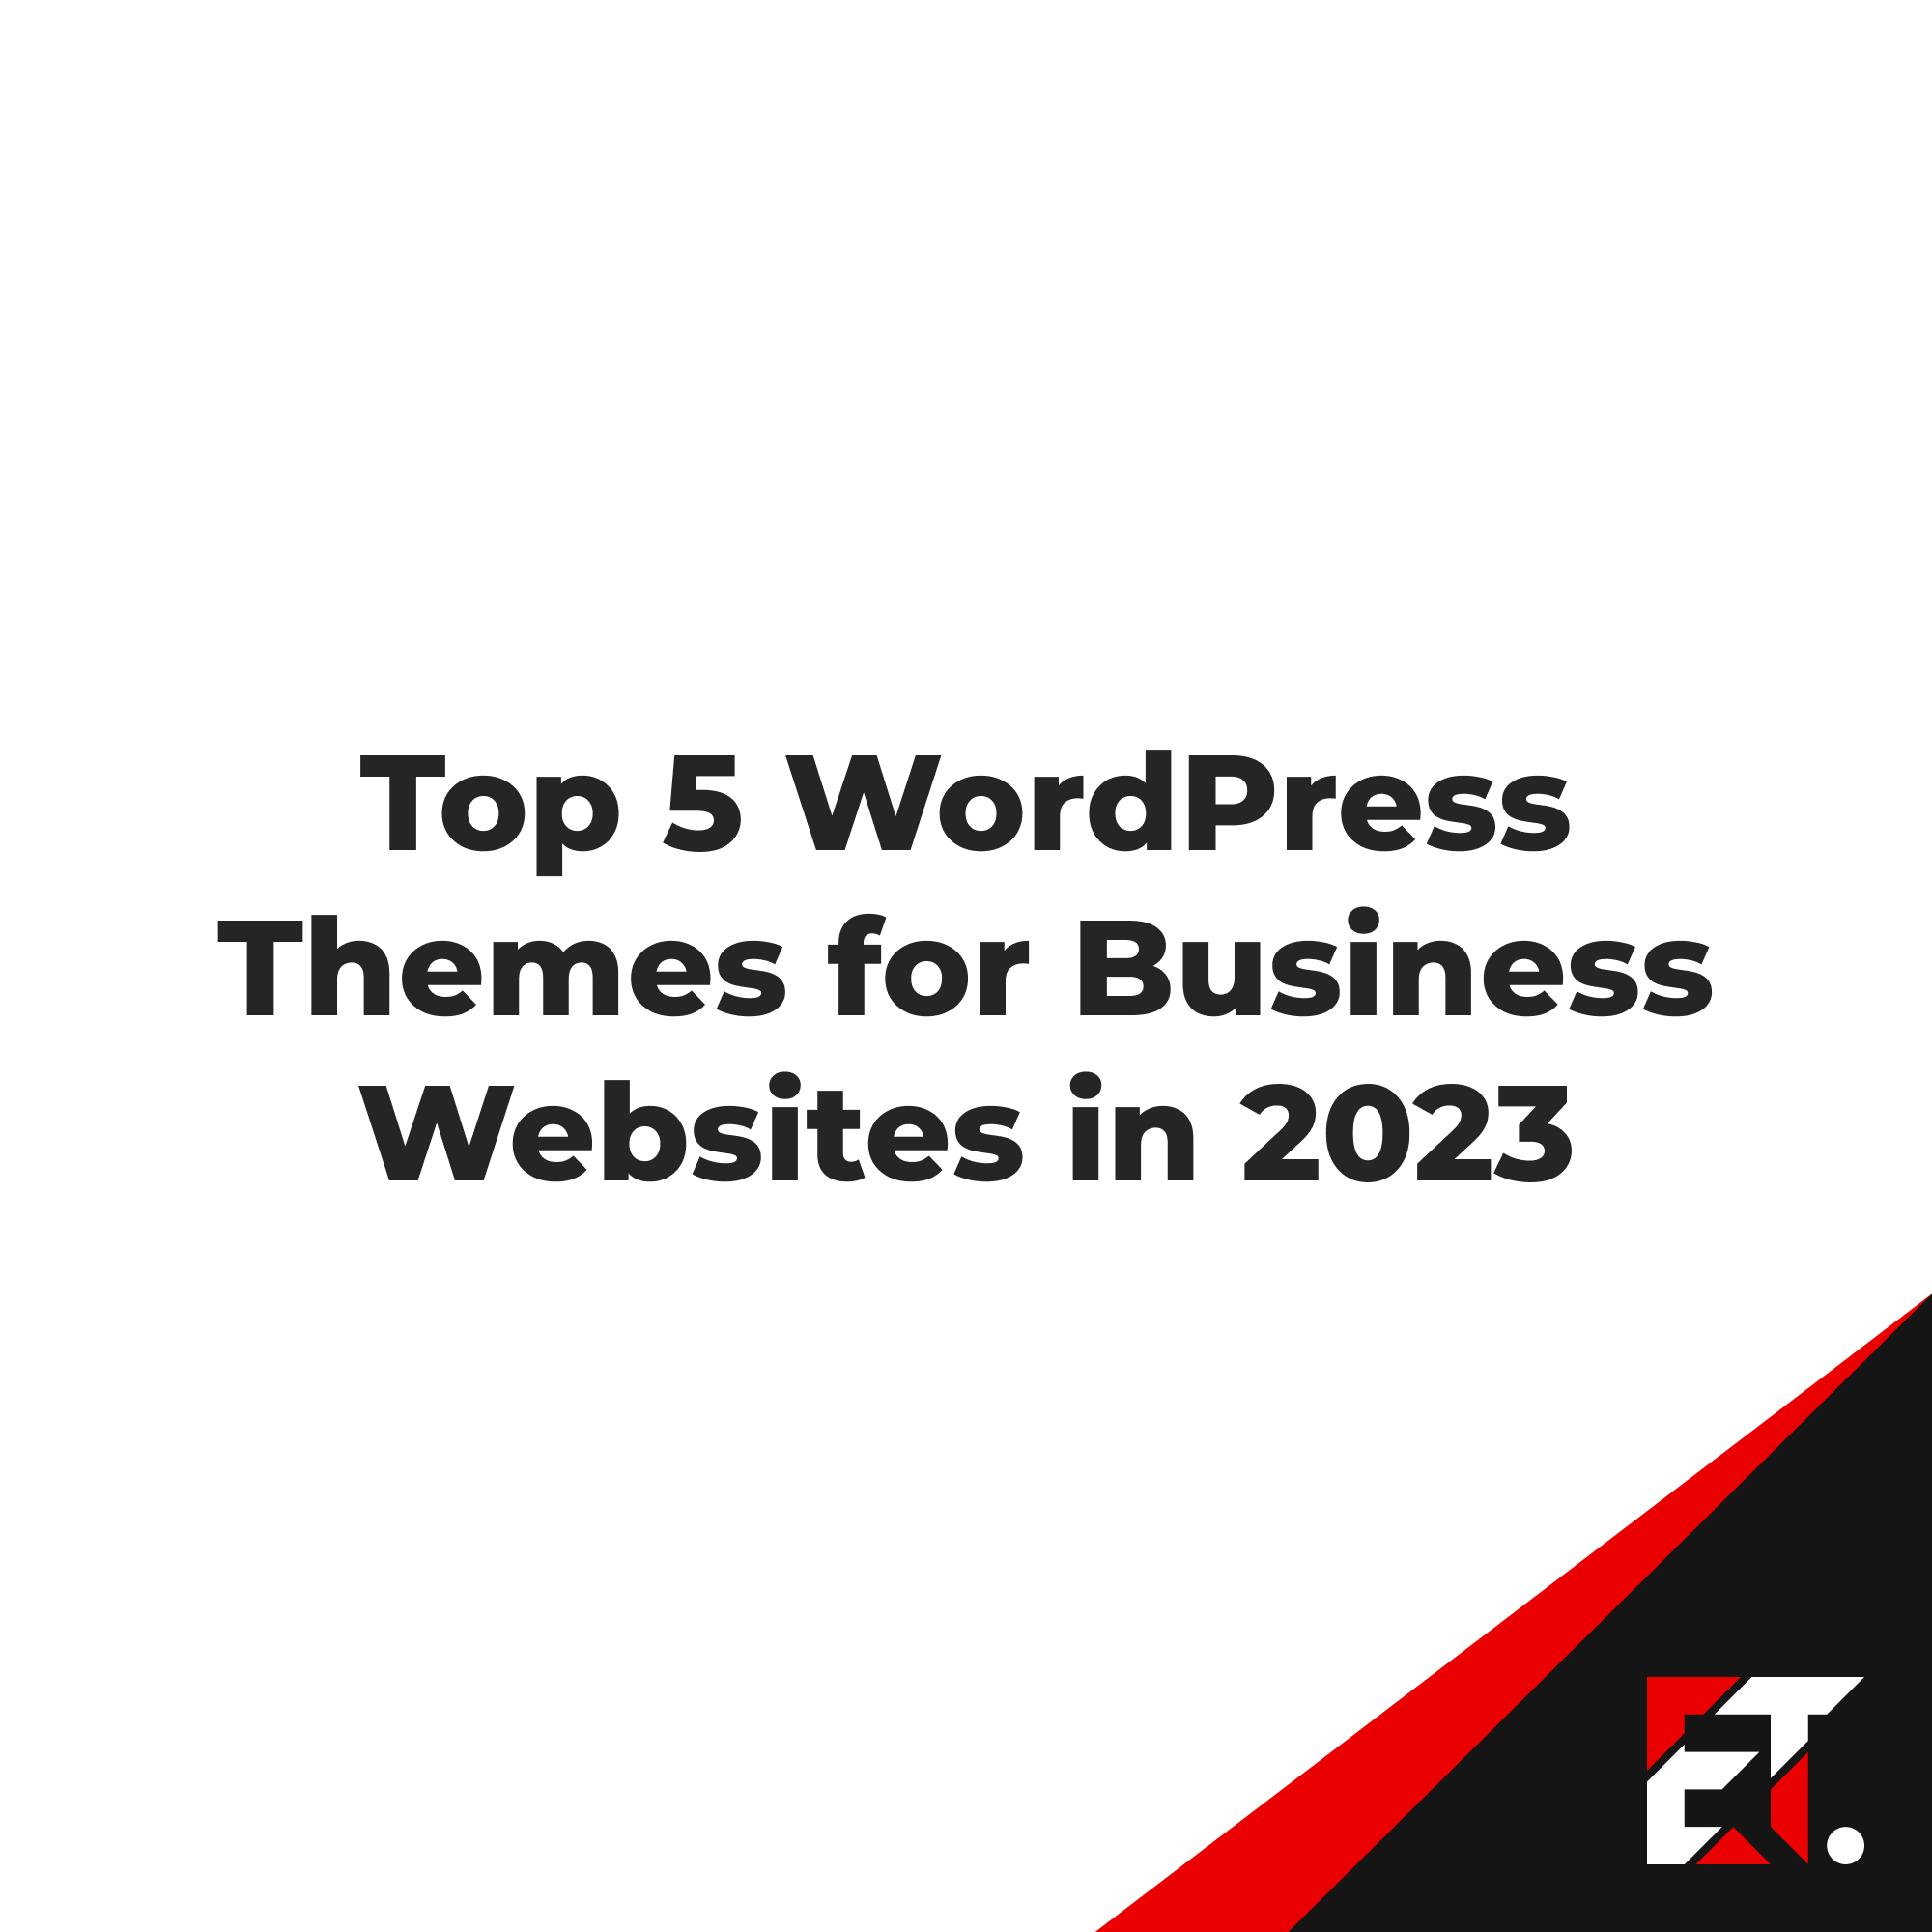 Top 5 WordPress Themes for Business Websites in 2023